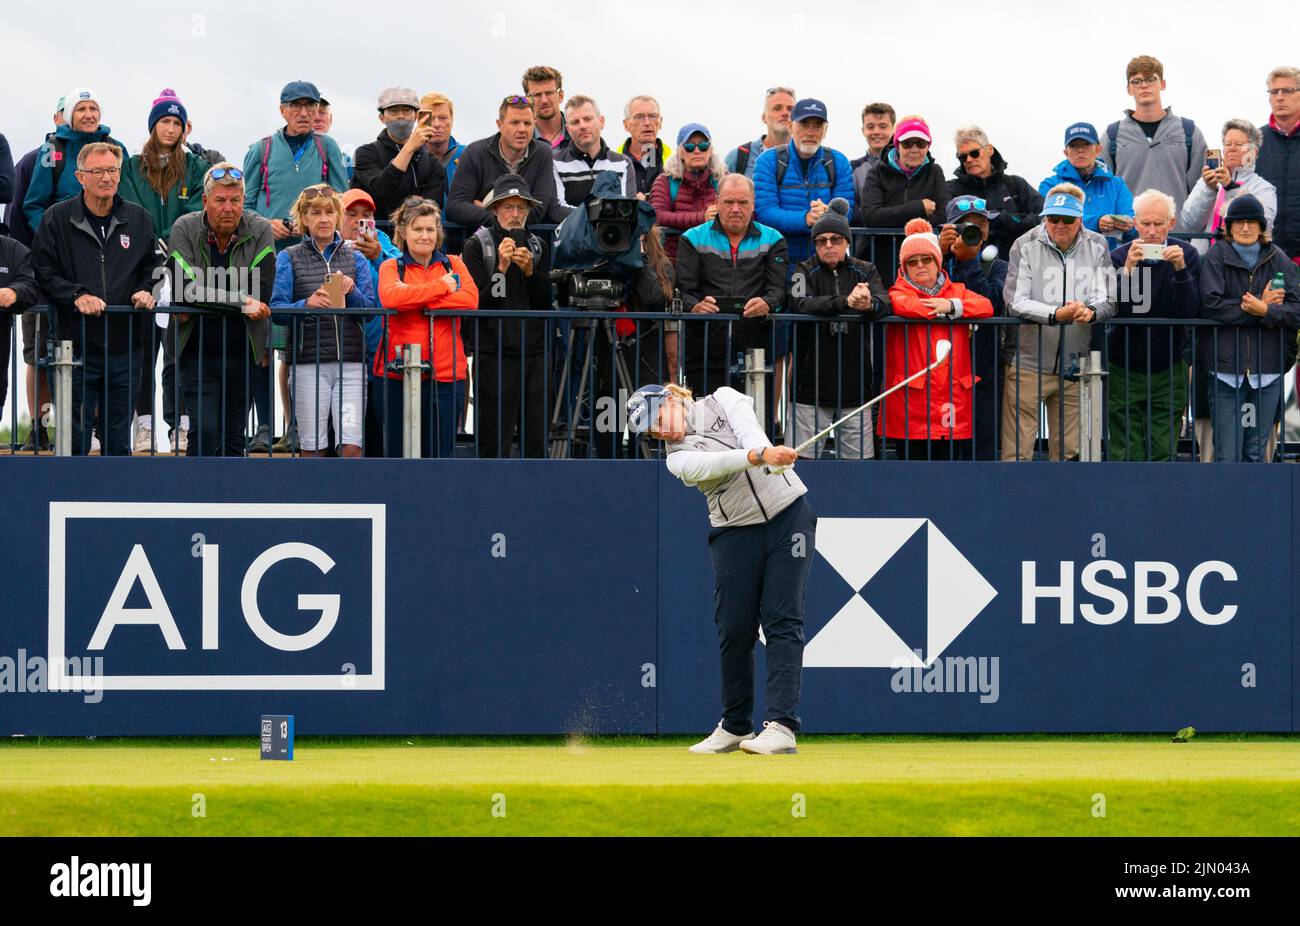 Gullane, Scotland, UK. 7th August 2022. Final  round of the AIG Women’s Open golf championship at Muirfield in Gullane, East Lothian. Pic; Ashleigh Buhai tees off at the 13th hole.   Iain Masterton/Alamy Live News Stock Photo